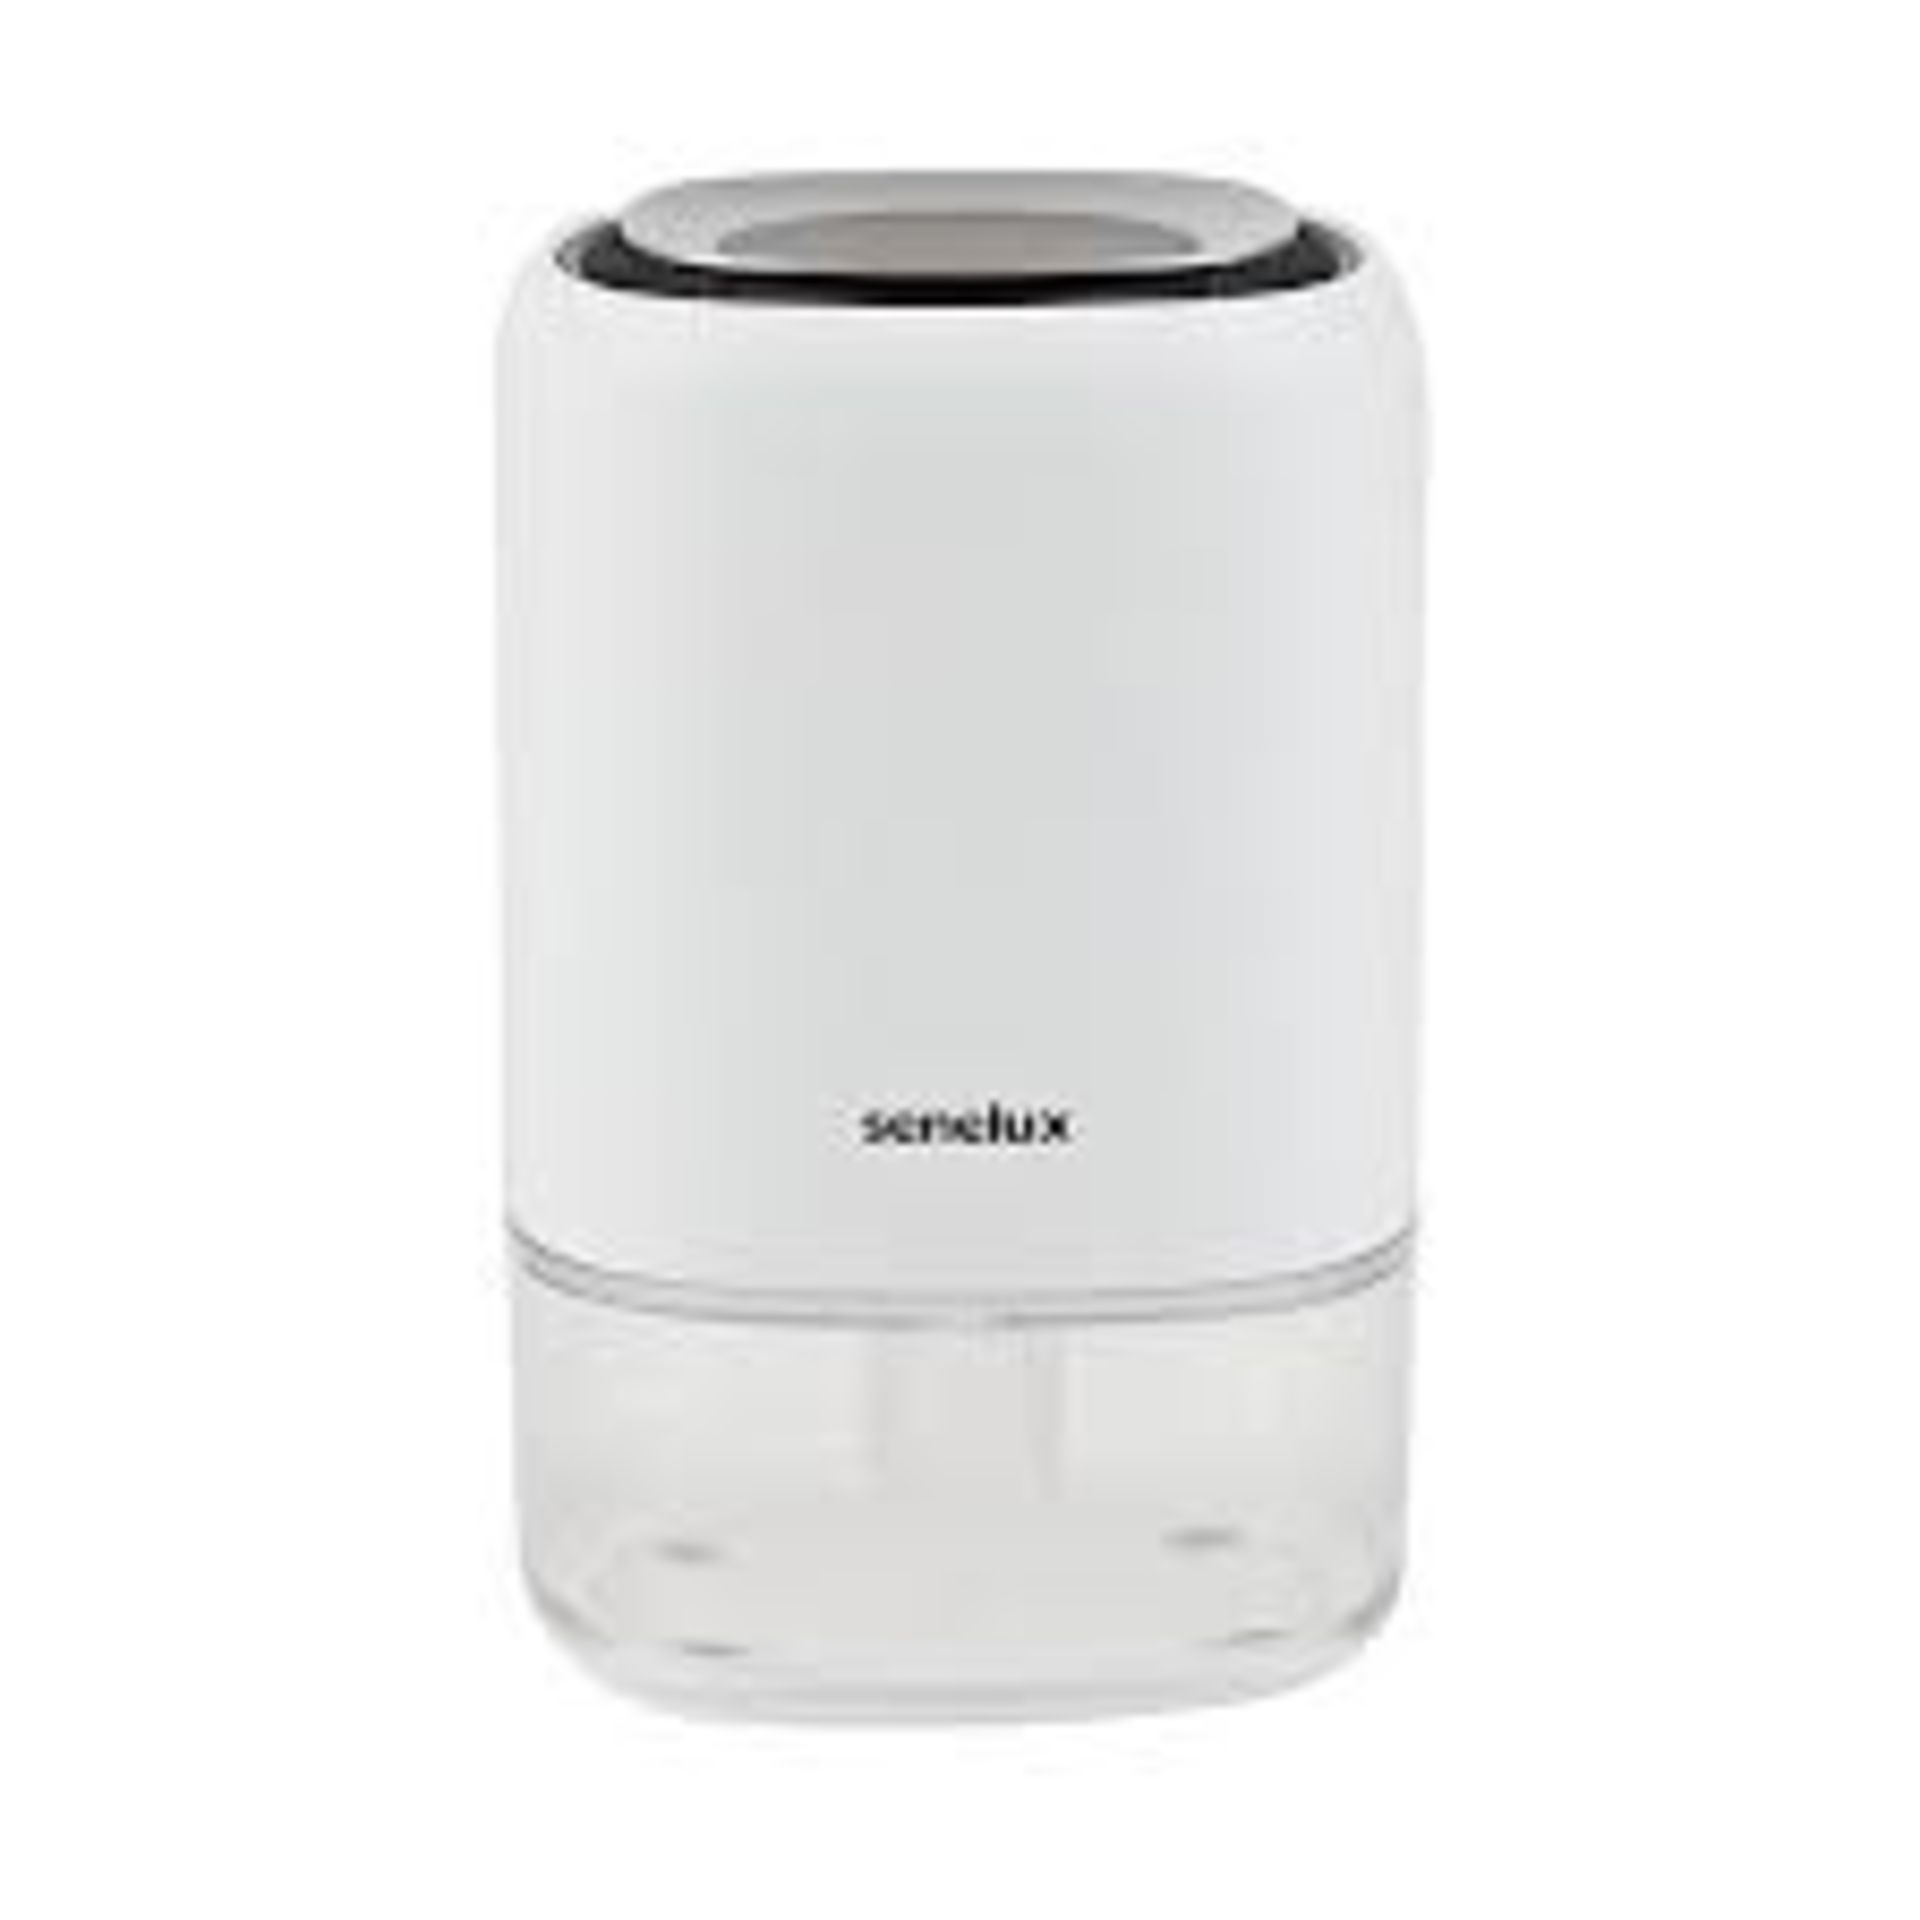 Senelux 1100ml Electric Dehumidifier for Home. - R13a.8.